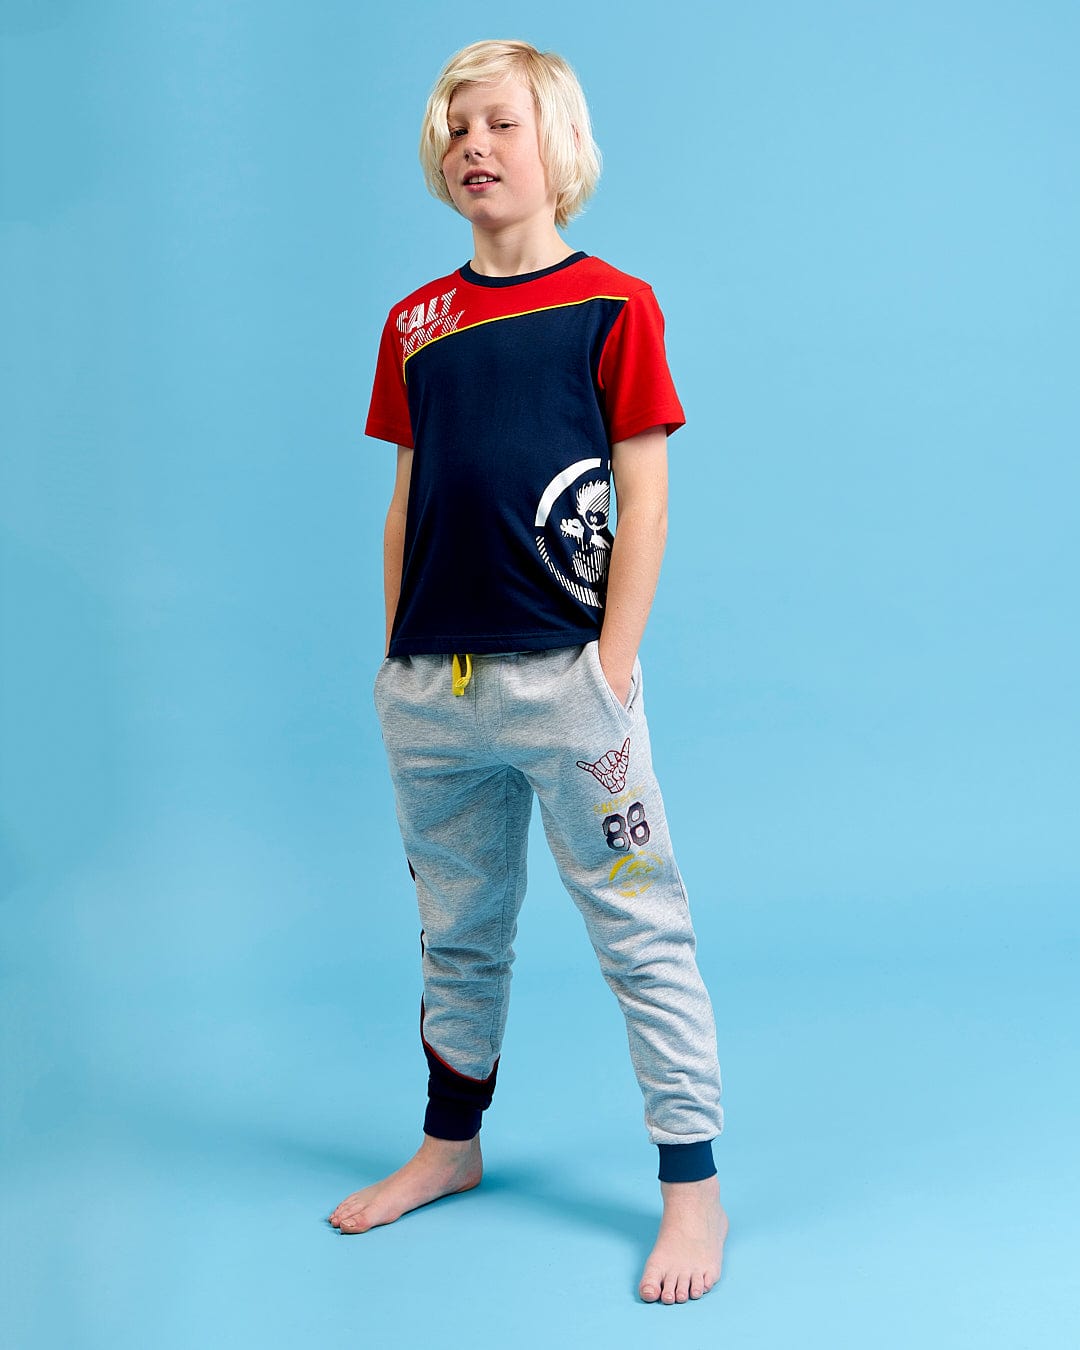 A young boy wearing a Saltrock Curby - Kids Jogger - Grey t-shirt and jogging pants.